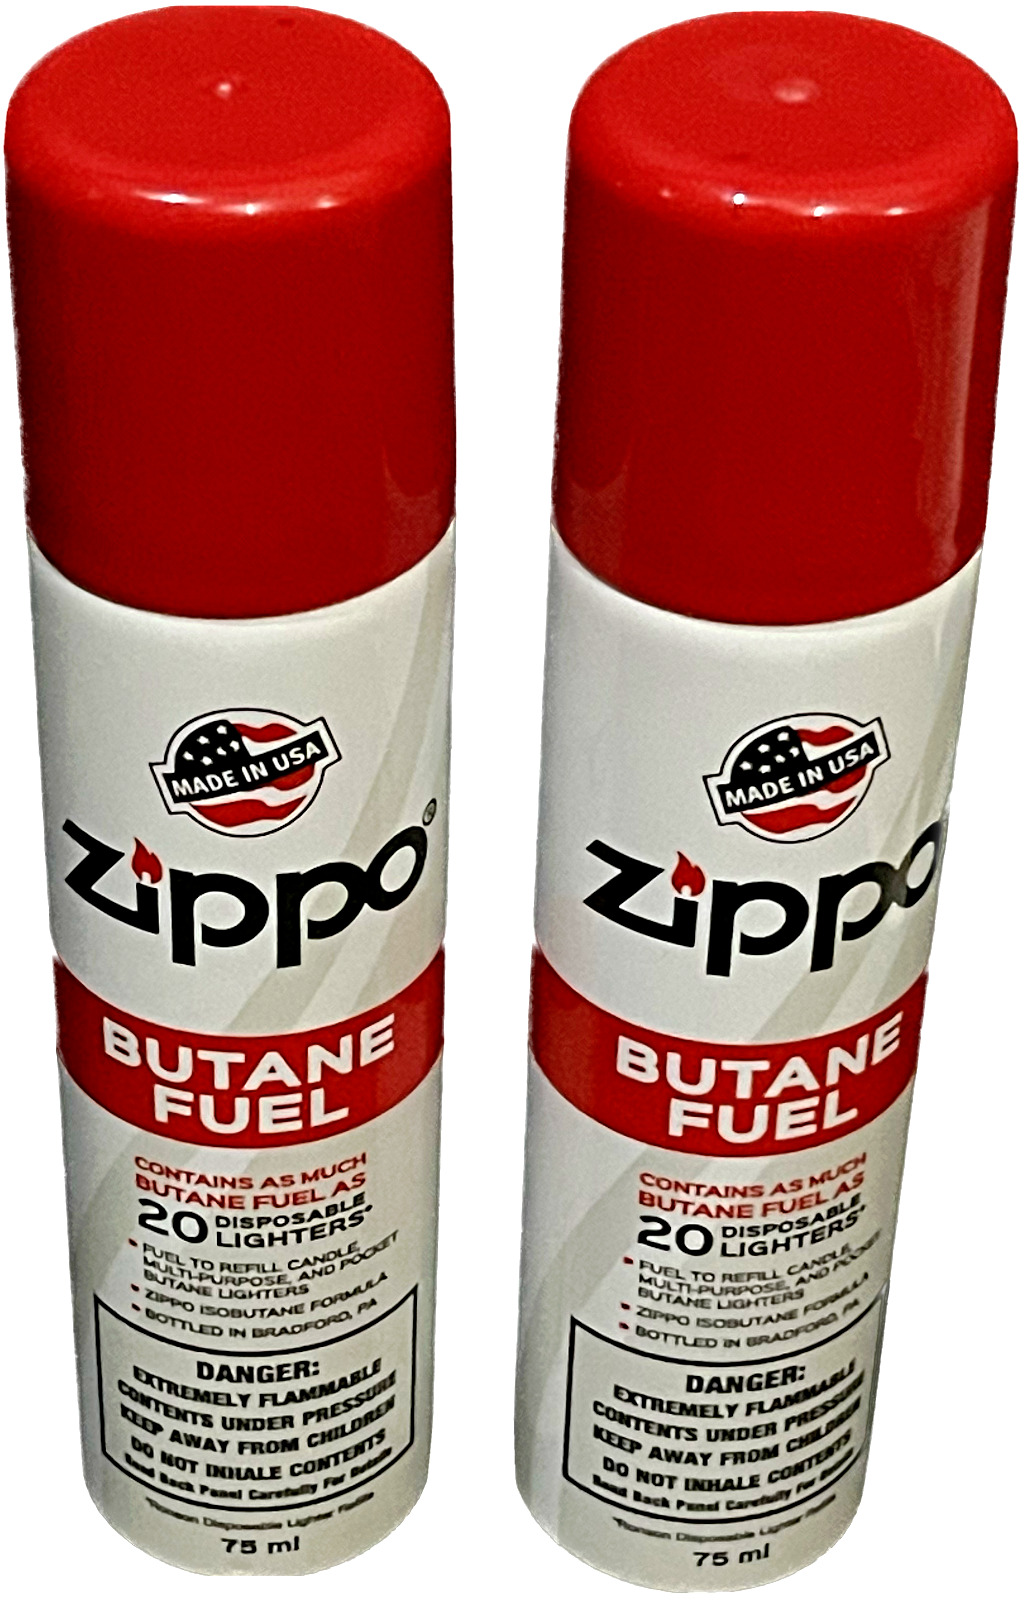 Zippo Butane Fuel, Authentic 75ml. In Each Can x2 (Two) Cans **Free Shipping**